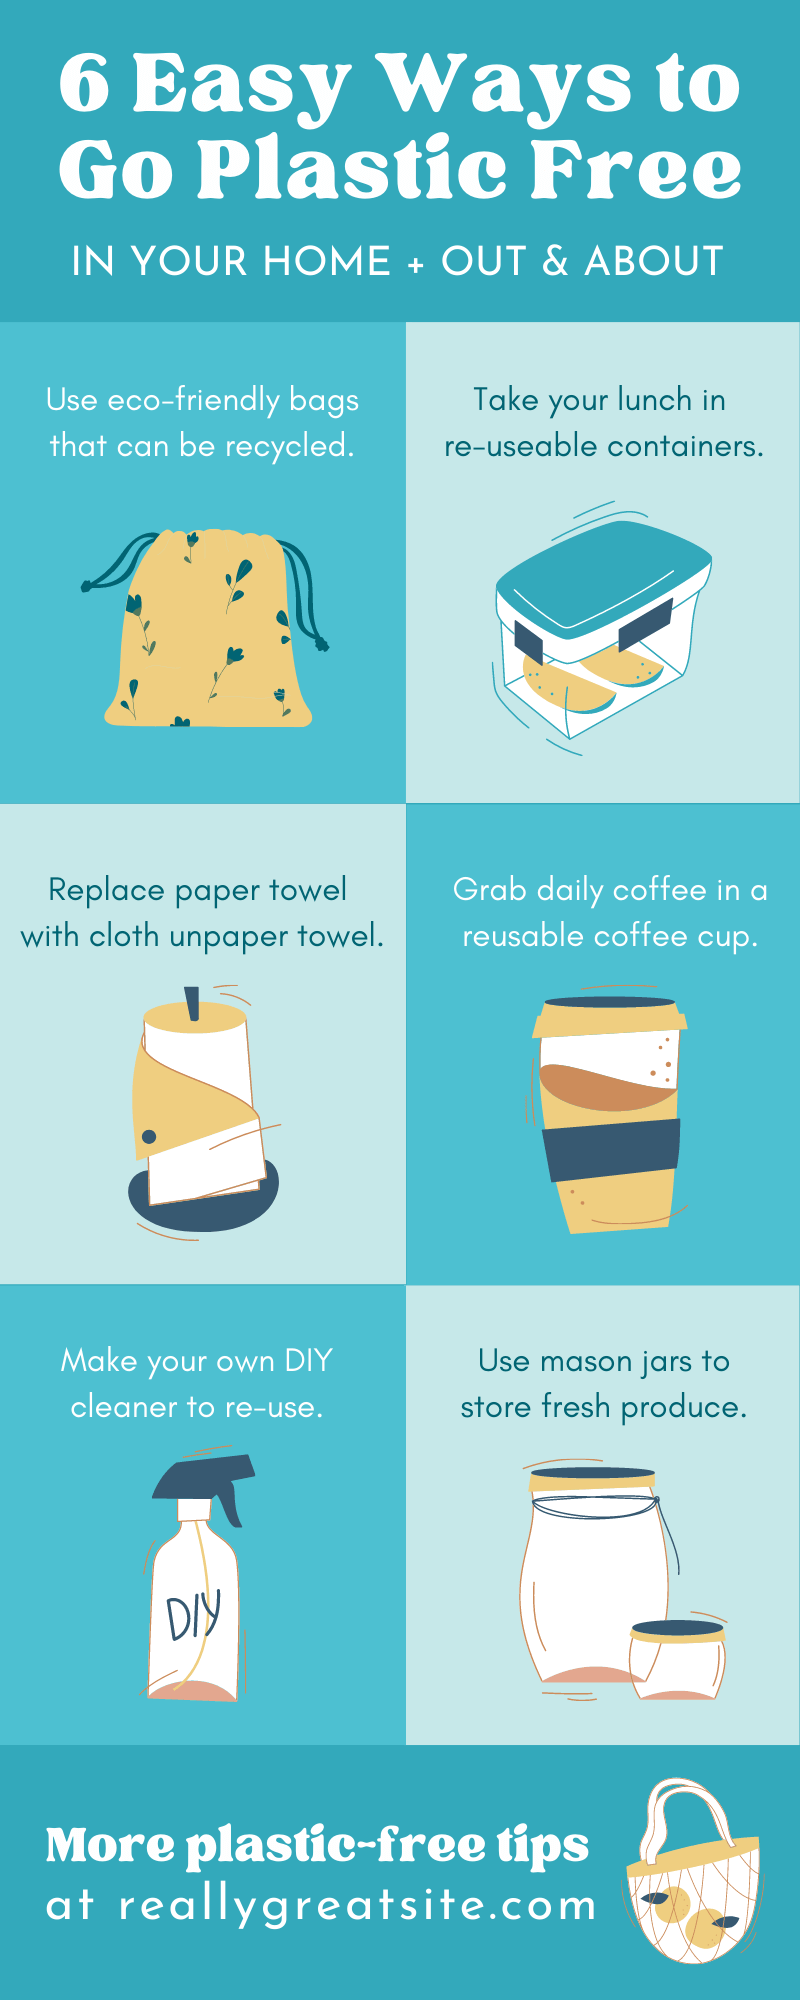 Teal Blue & Yellow Plastic Free Tips Infographic